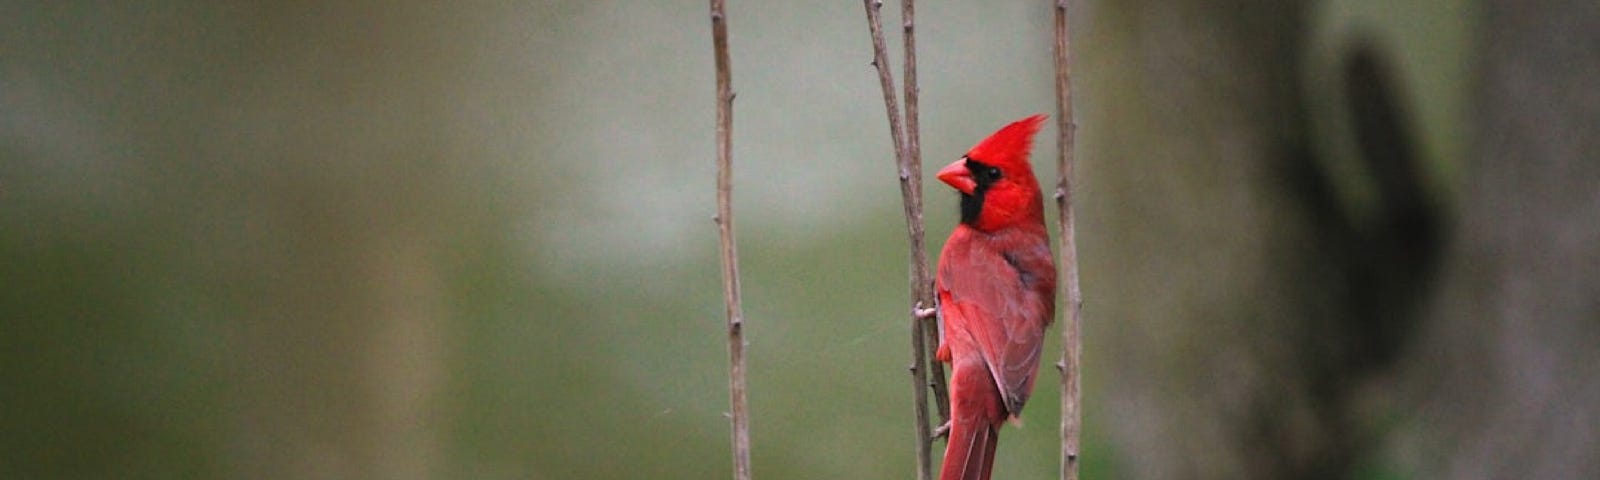 A red cardinal stands vertical on a reed, it is a misty field, with the vibrant red contrasting with the rest of the photograph’s muted colours.